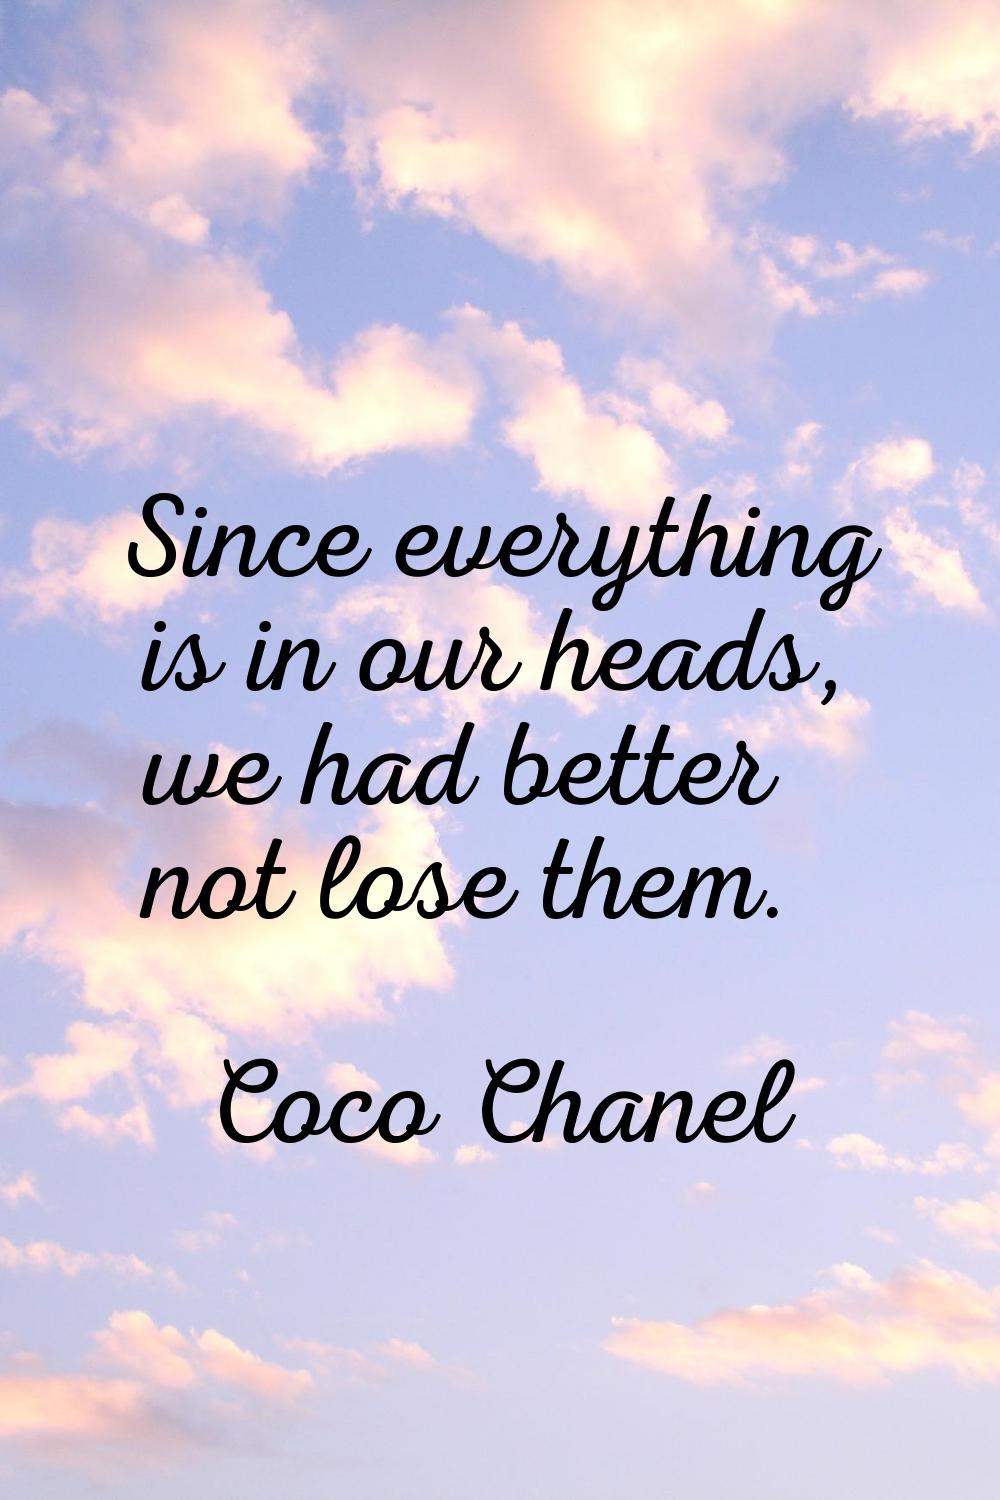 Since everything is in our heads, we had better not lose them.